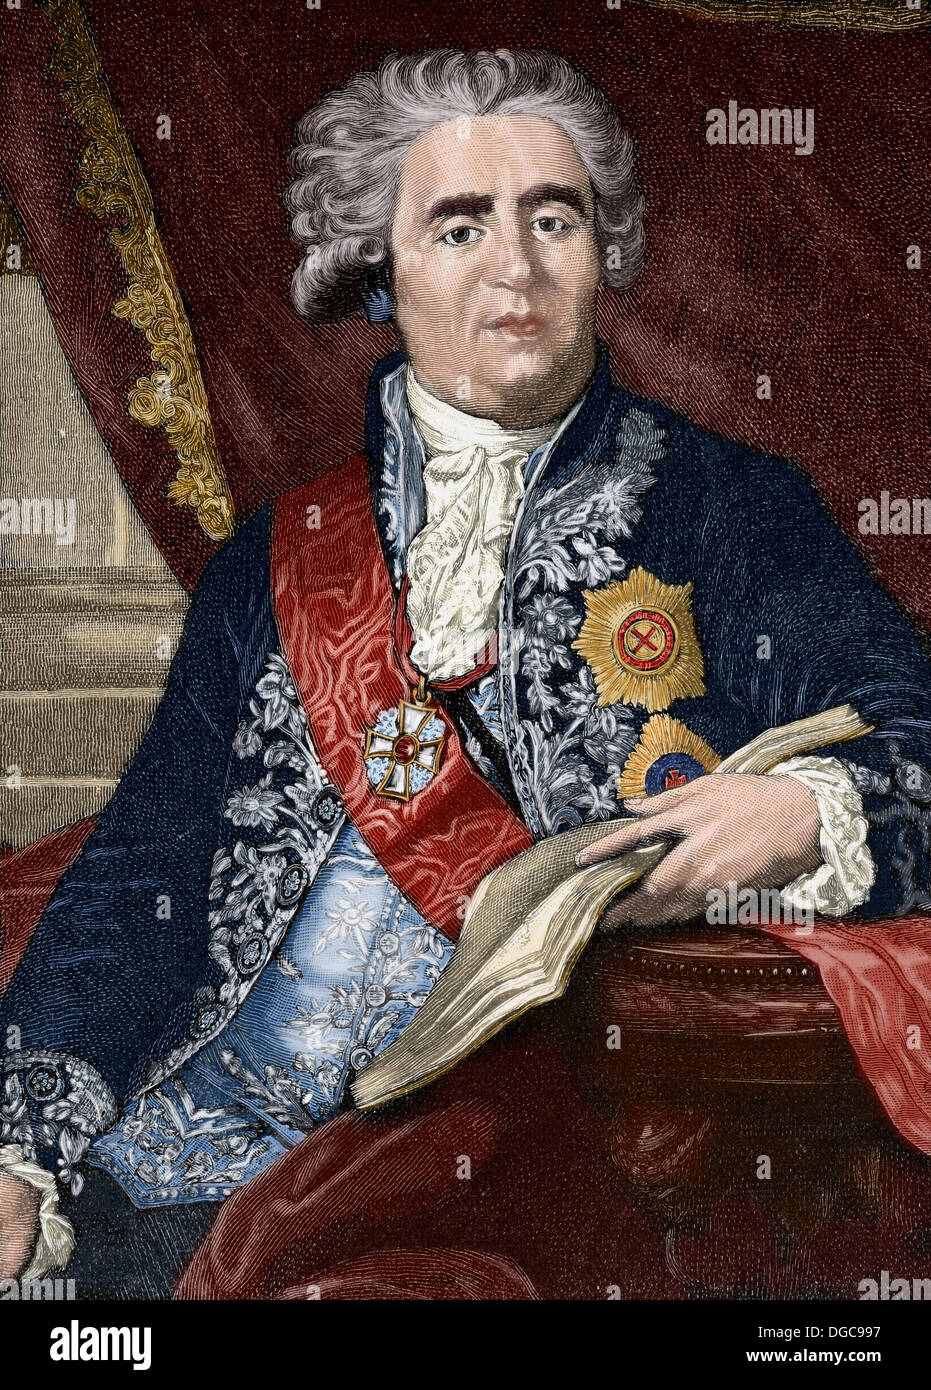 Prince Alexander Bezborodko (1747-1799). Grand Chancellor of Russia and chief architect of Catherine the Great. Colored. Stock Photo